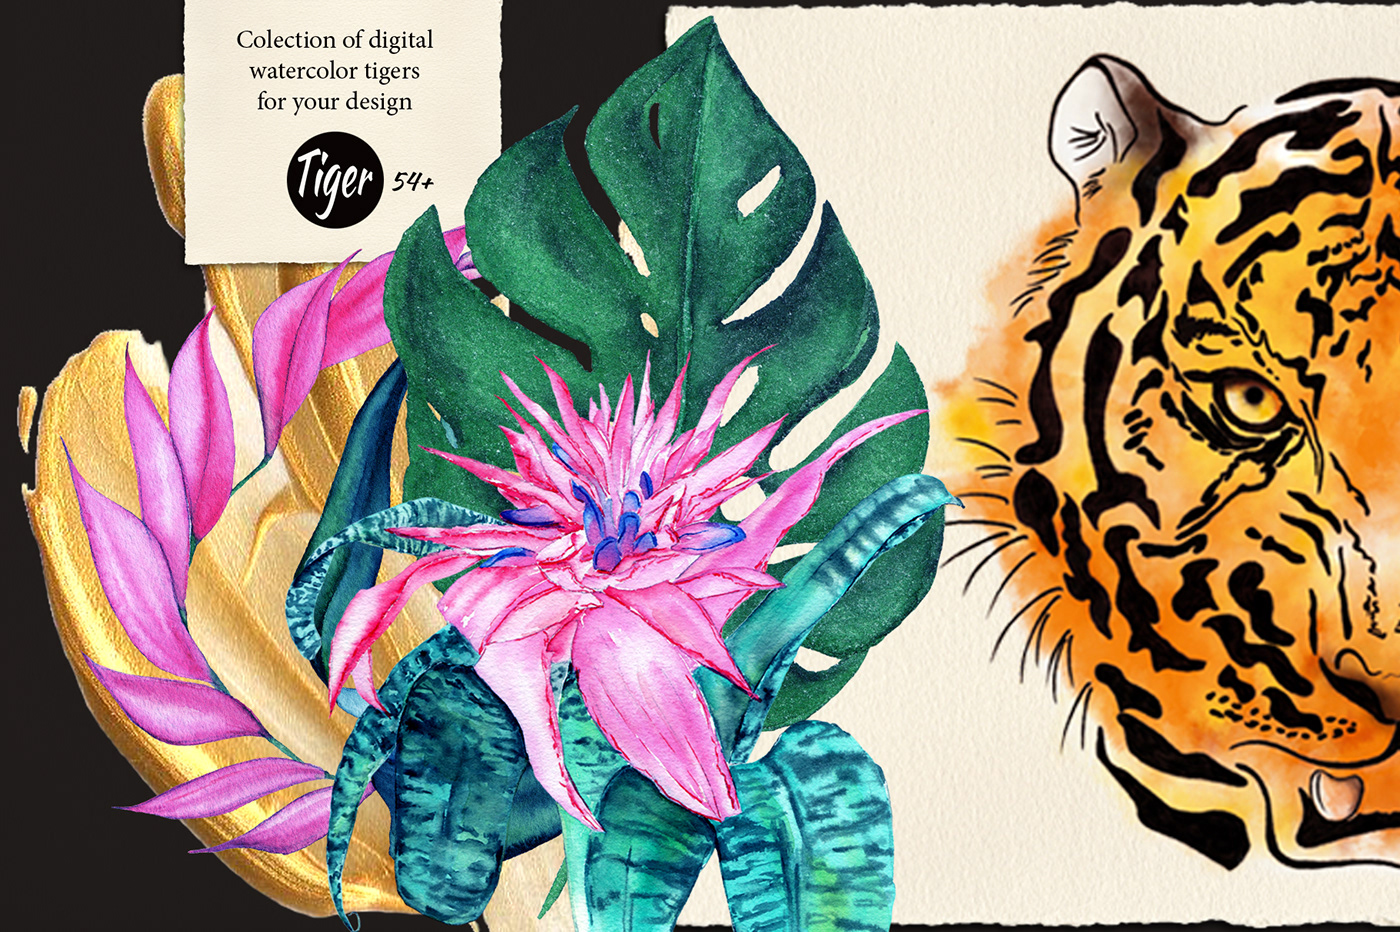 Wild Tiger watercolor collection